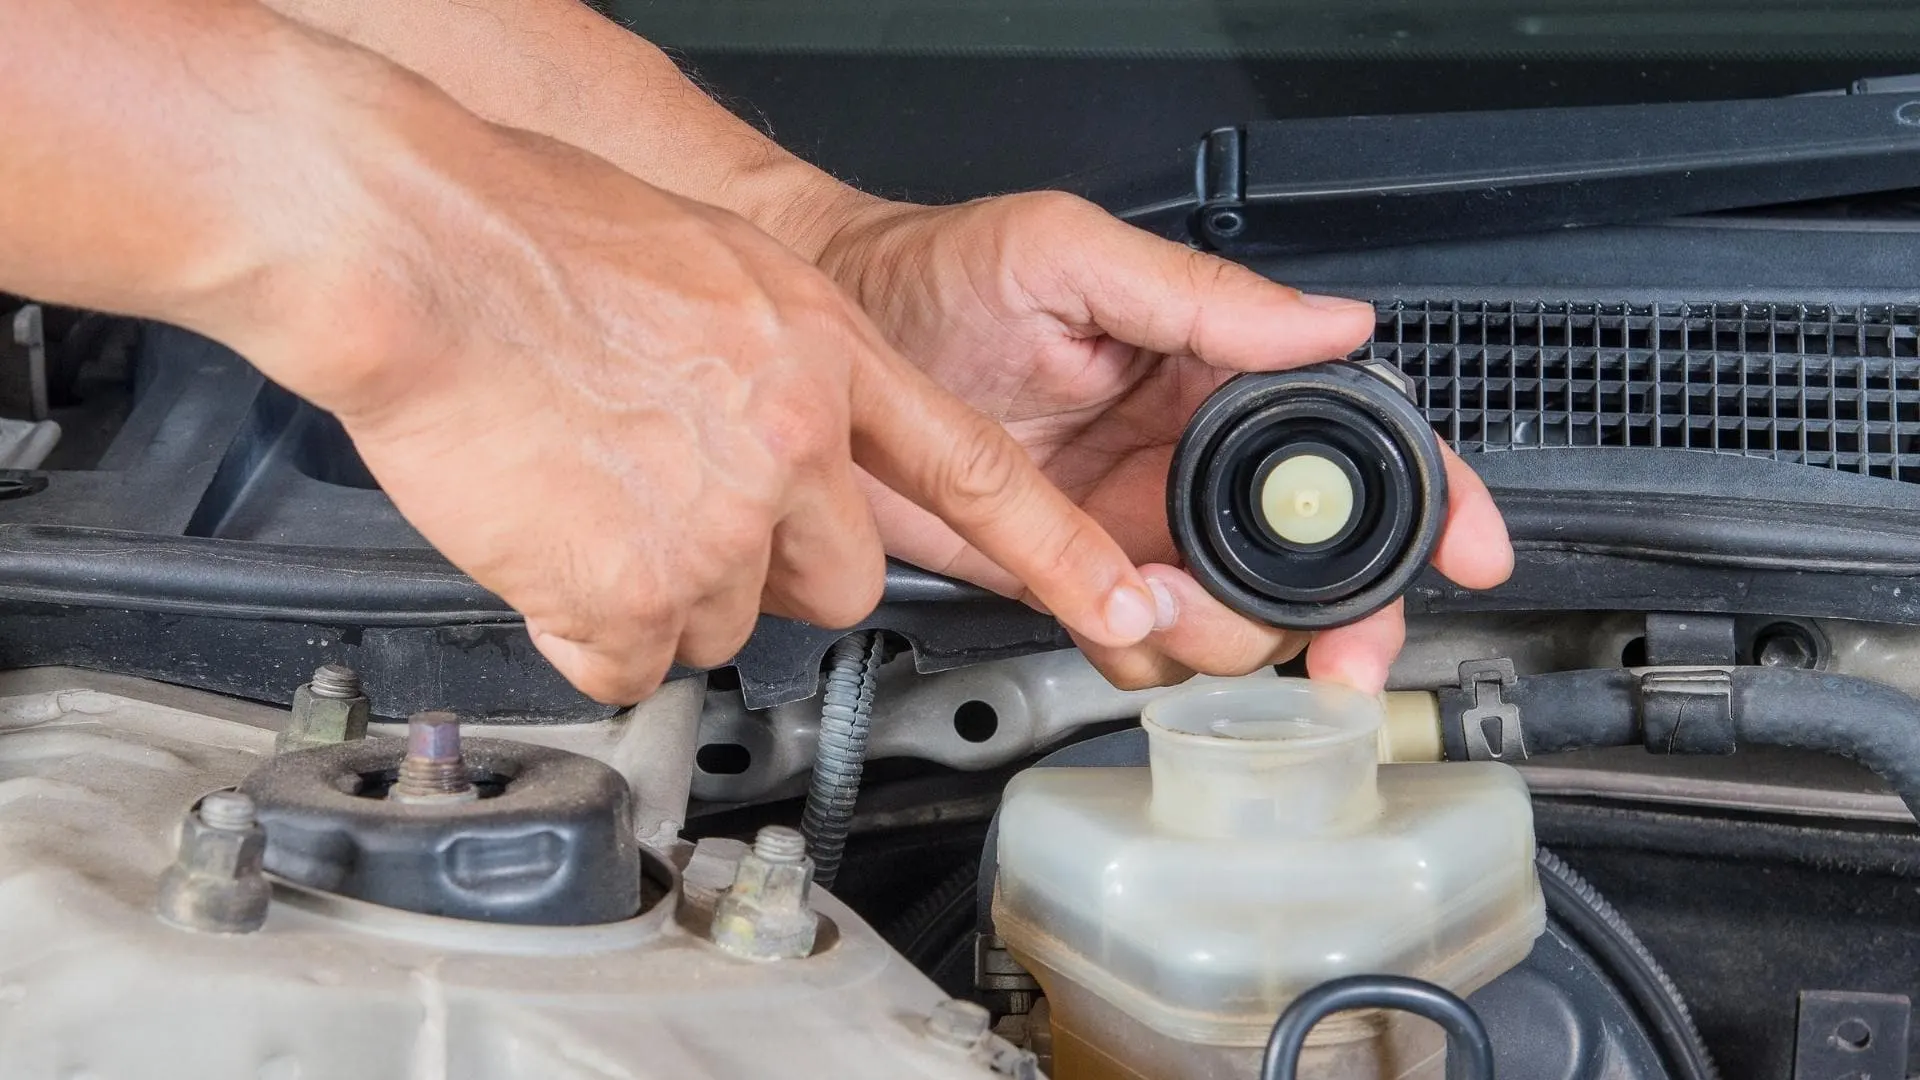 Checking or changing brake fluid may not be a RV DIY fluid & filter replacement project for you